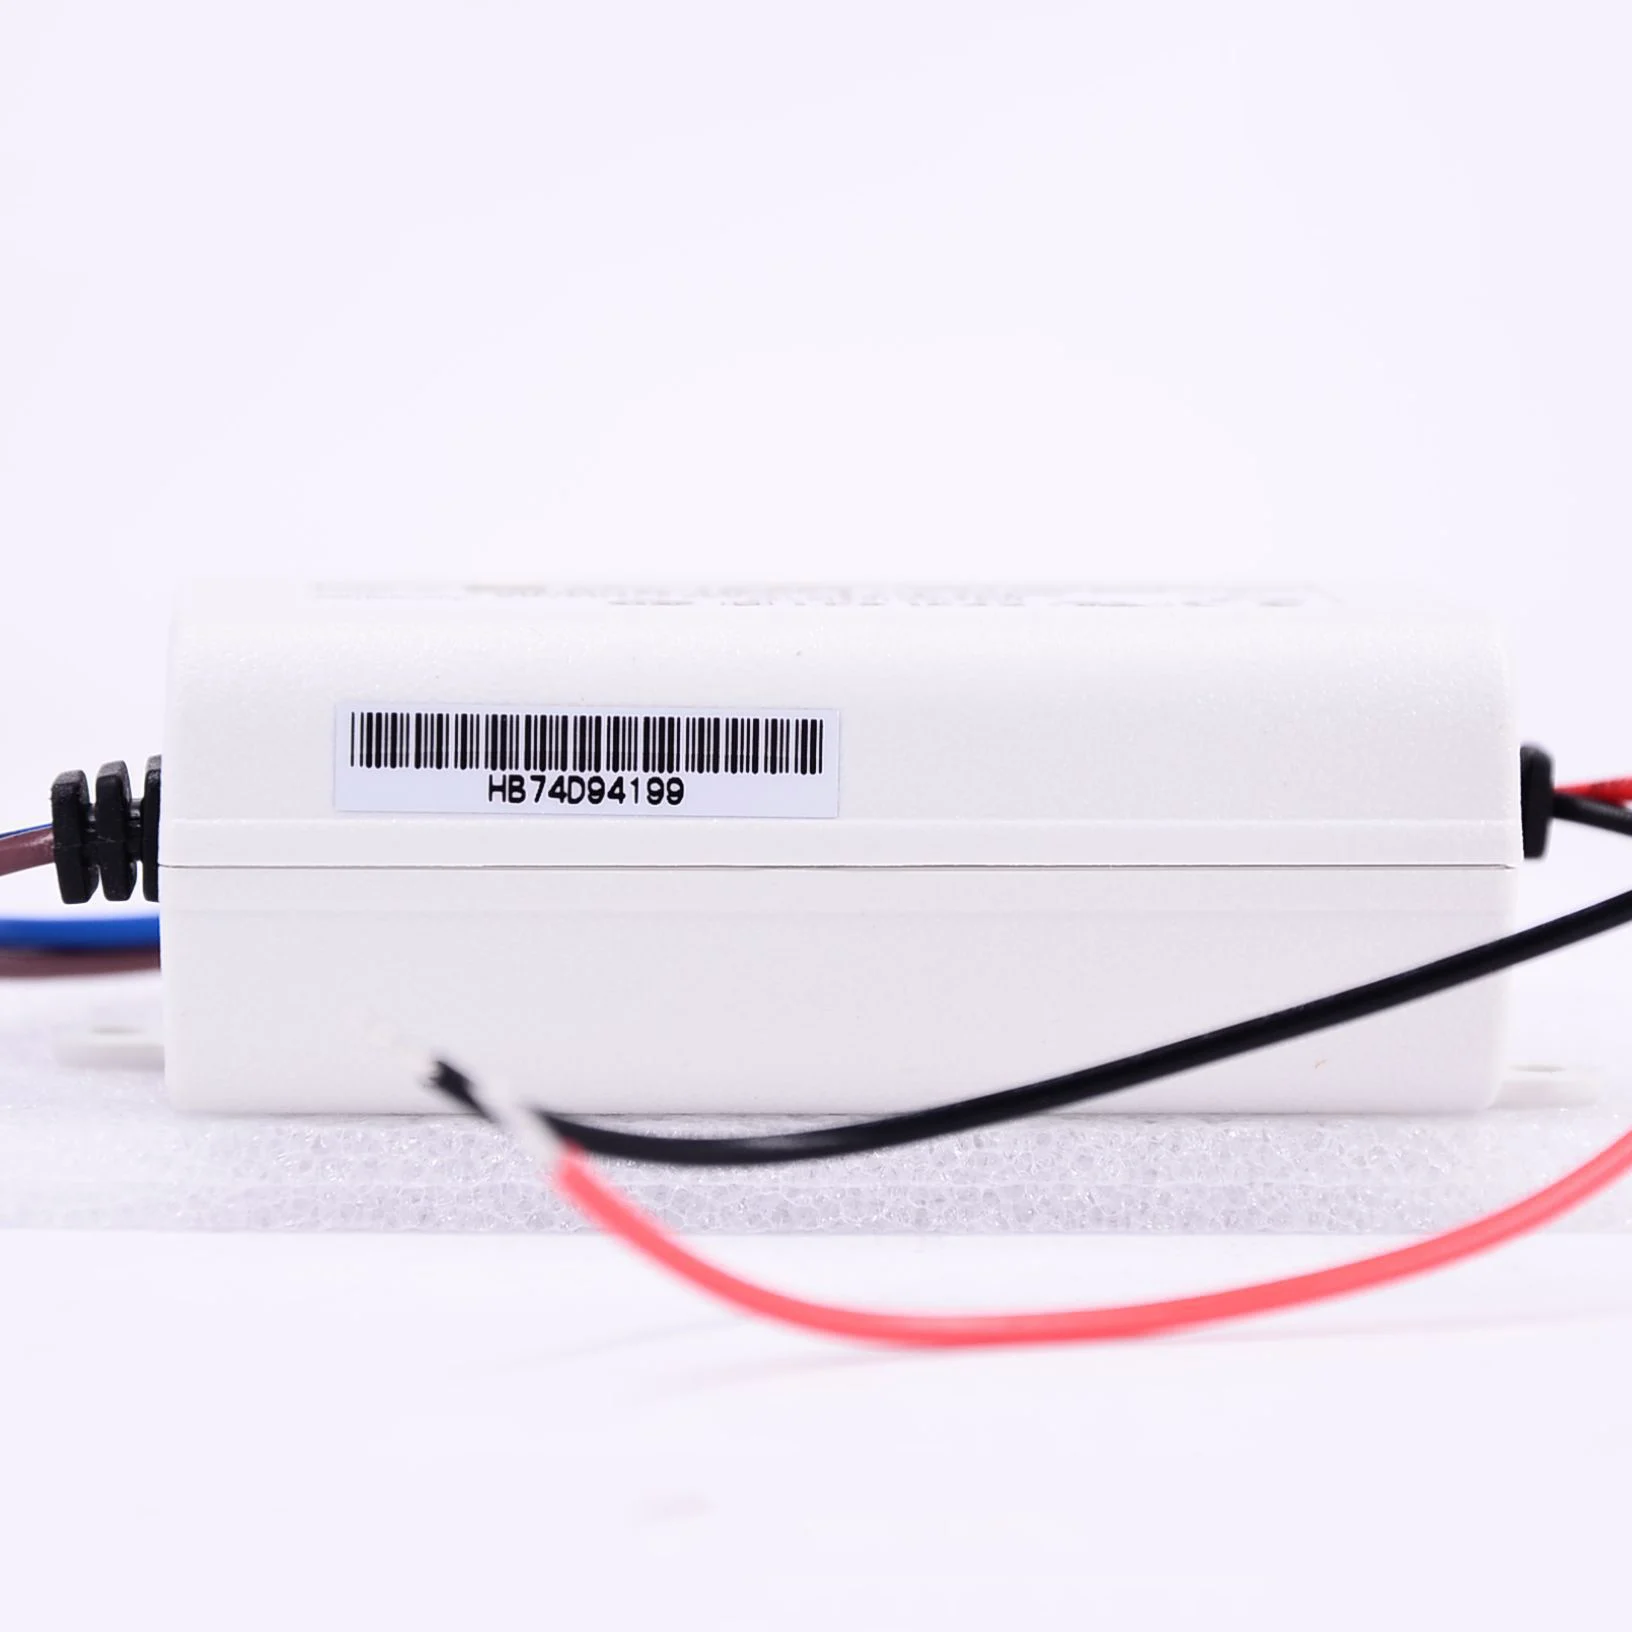 Mean Well APC-12-700 Constant Current LED Driver 12.6W 9-18V 700mA 